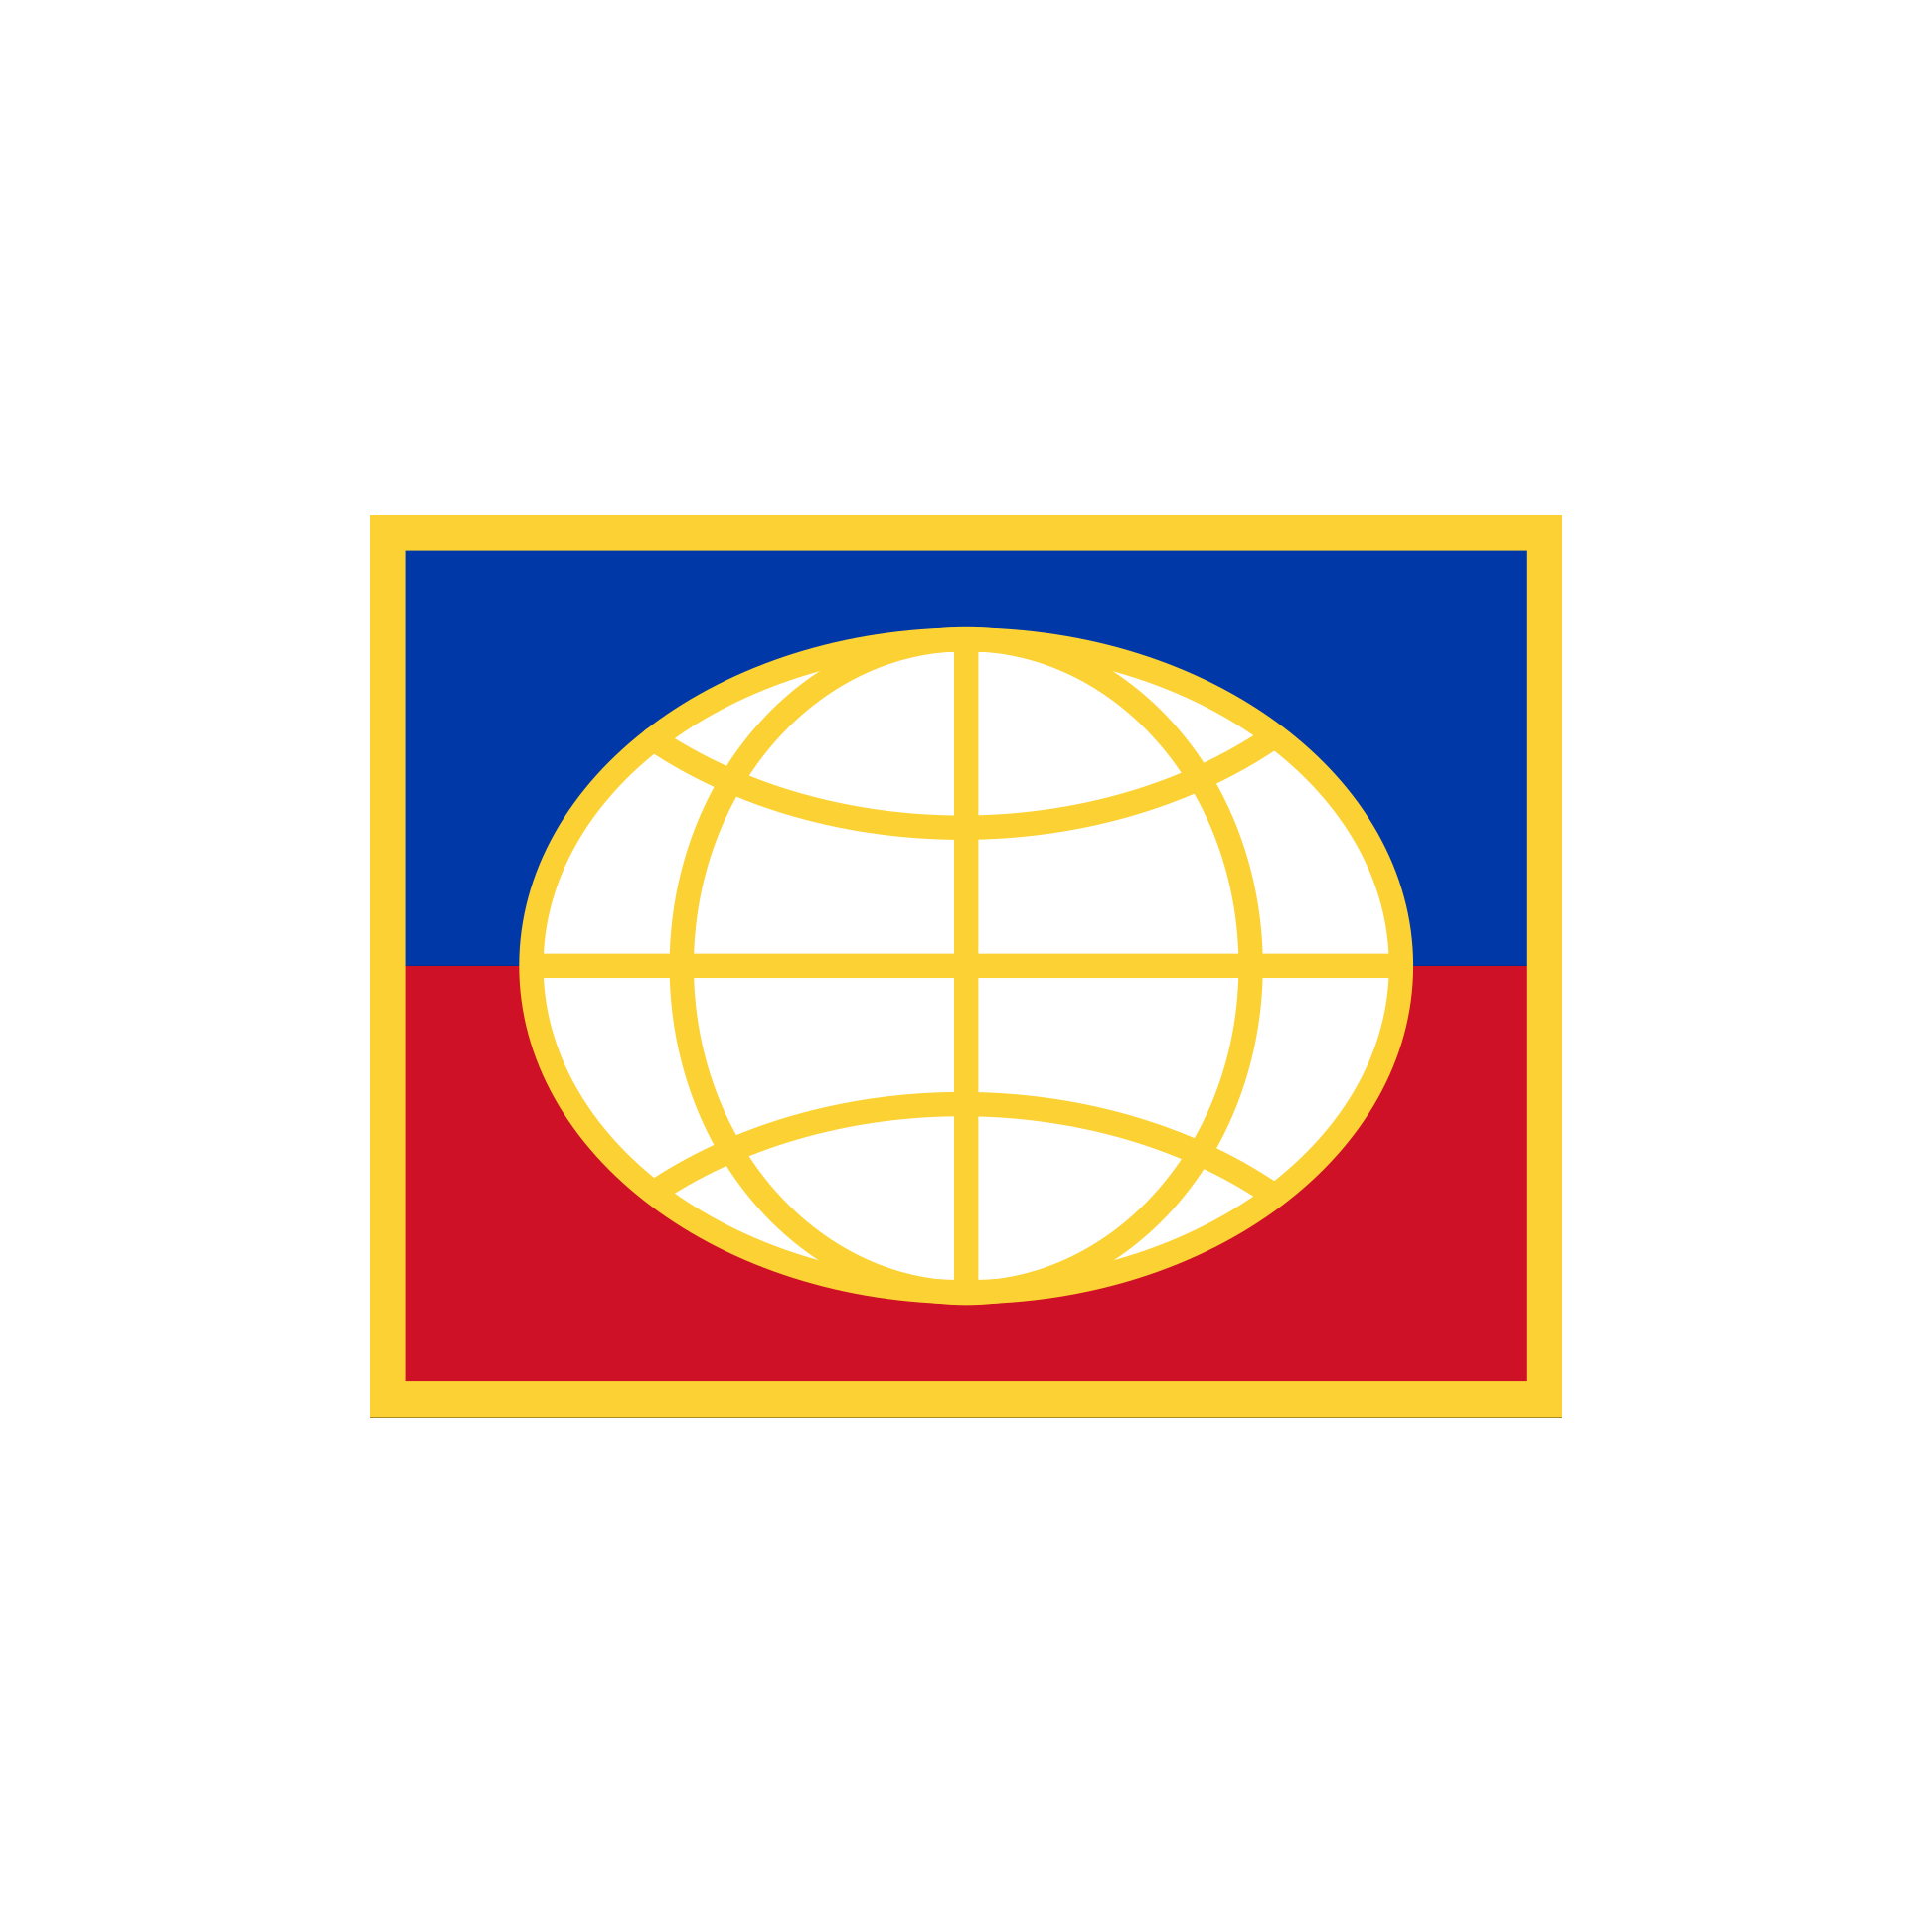 Image containing the logo of Commission on Filipino Overseas